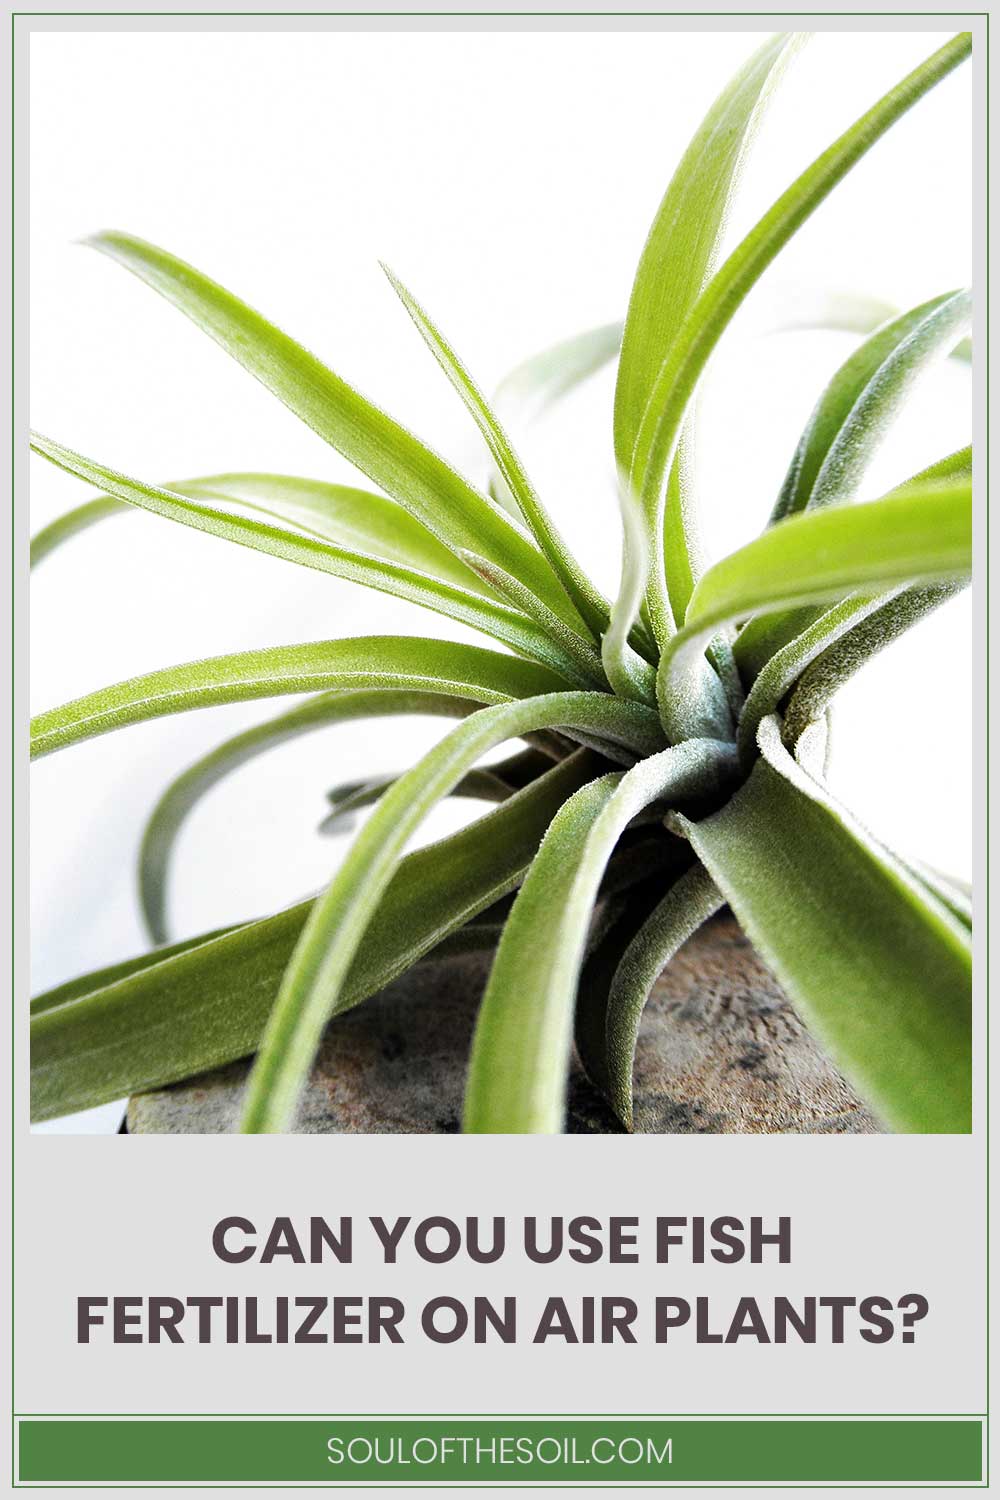 Can You Use Fish Fertilizer On Air Plants?